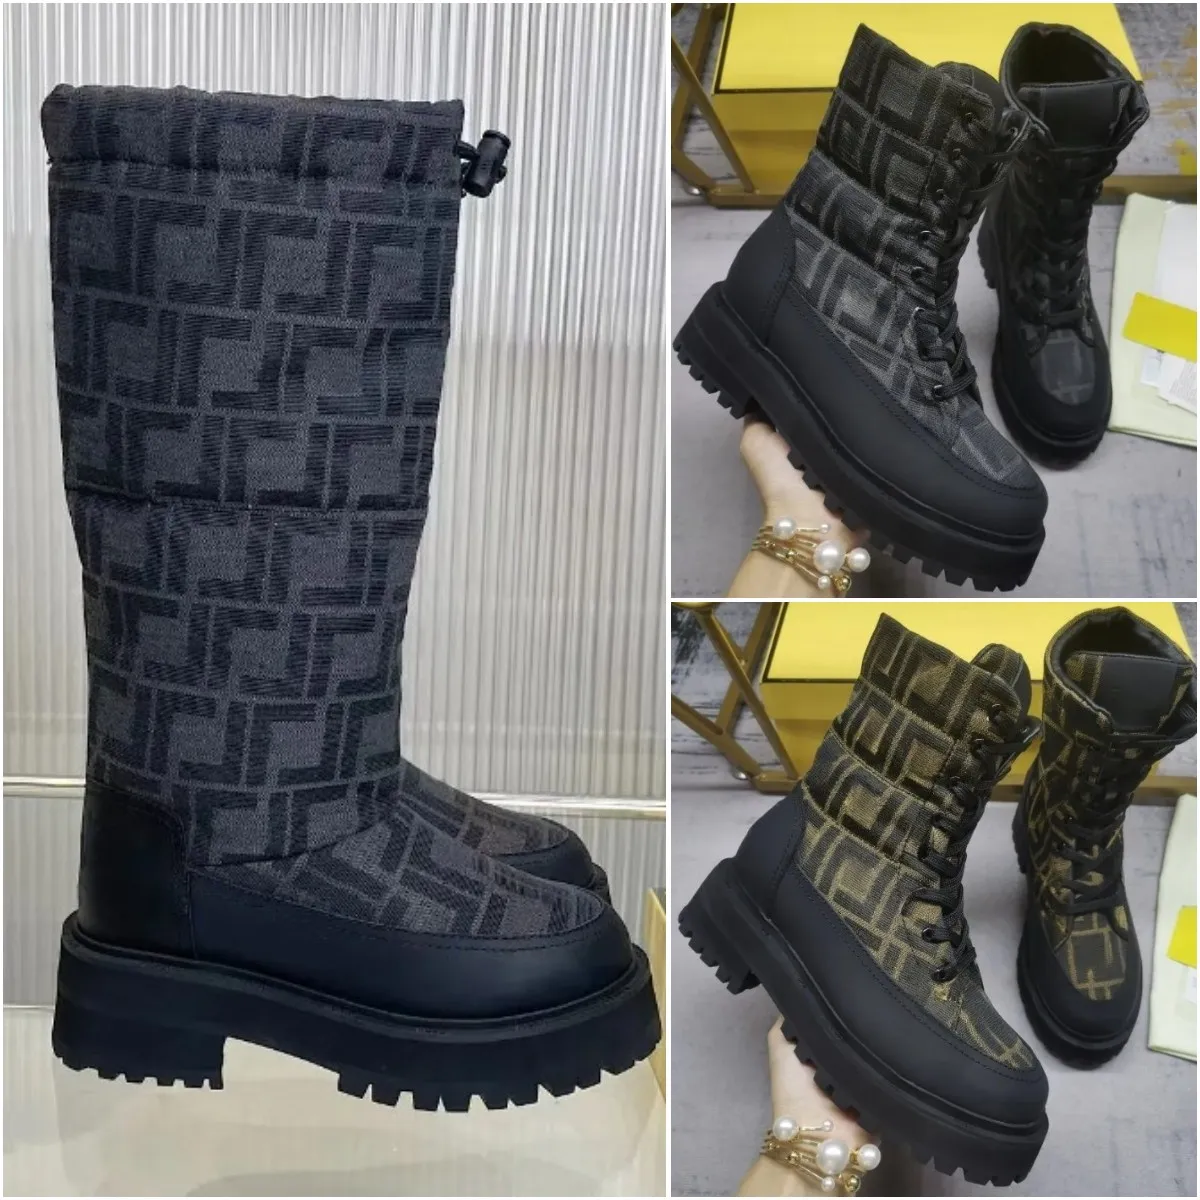 Signature Boots fashion leather Bike boot with fabric Combat boots designer Women quilted jacquard fabric inserts Non-slip rubber sole Made leath Size 35-41